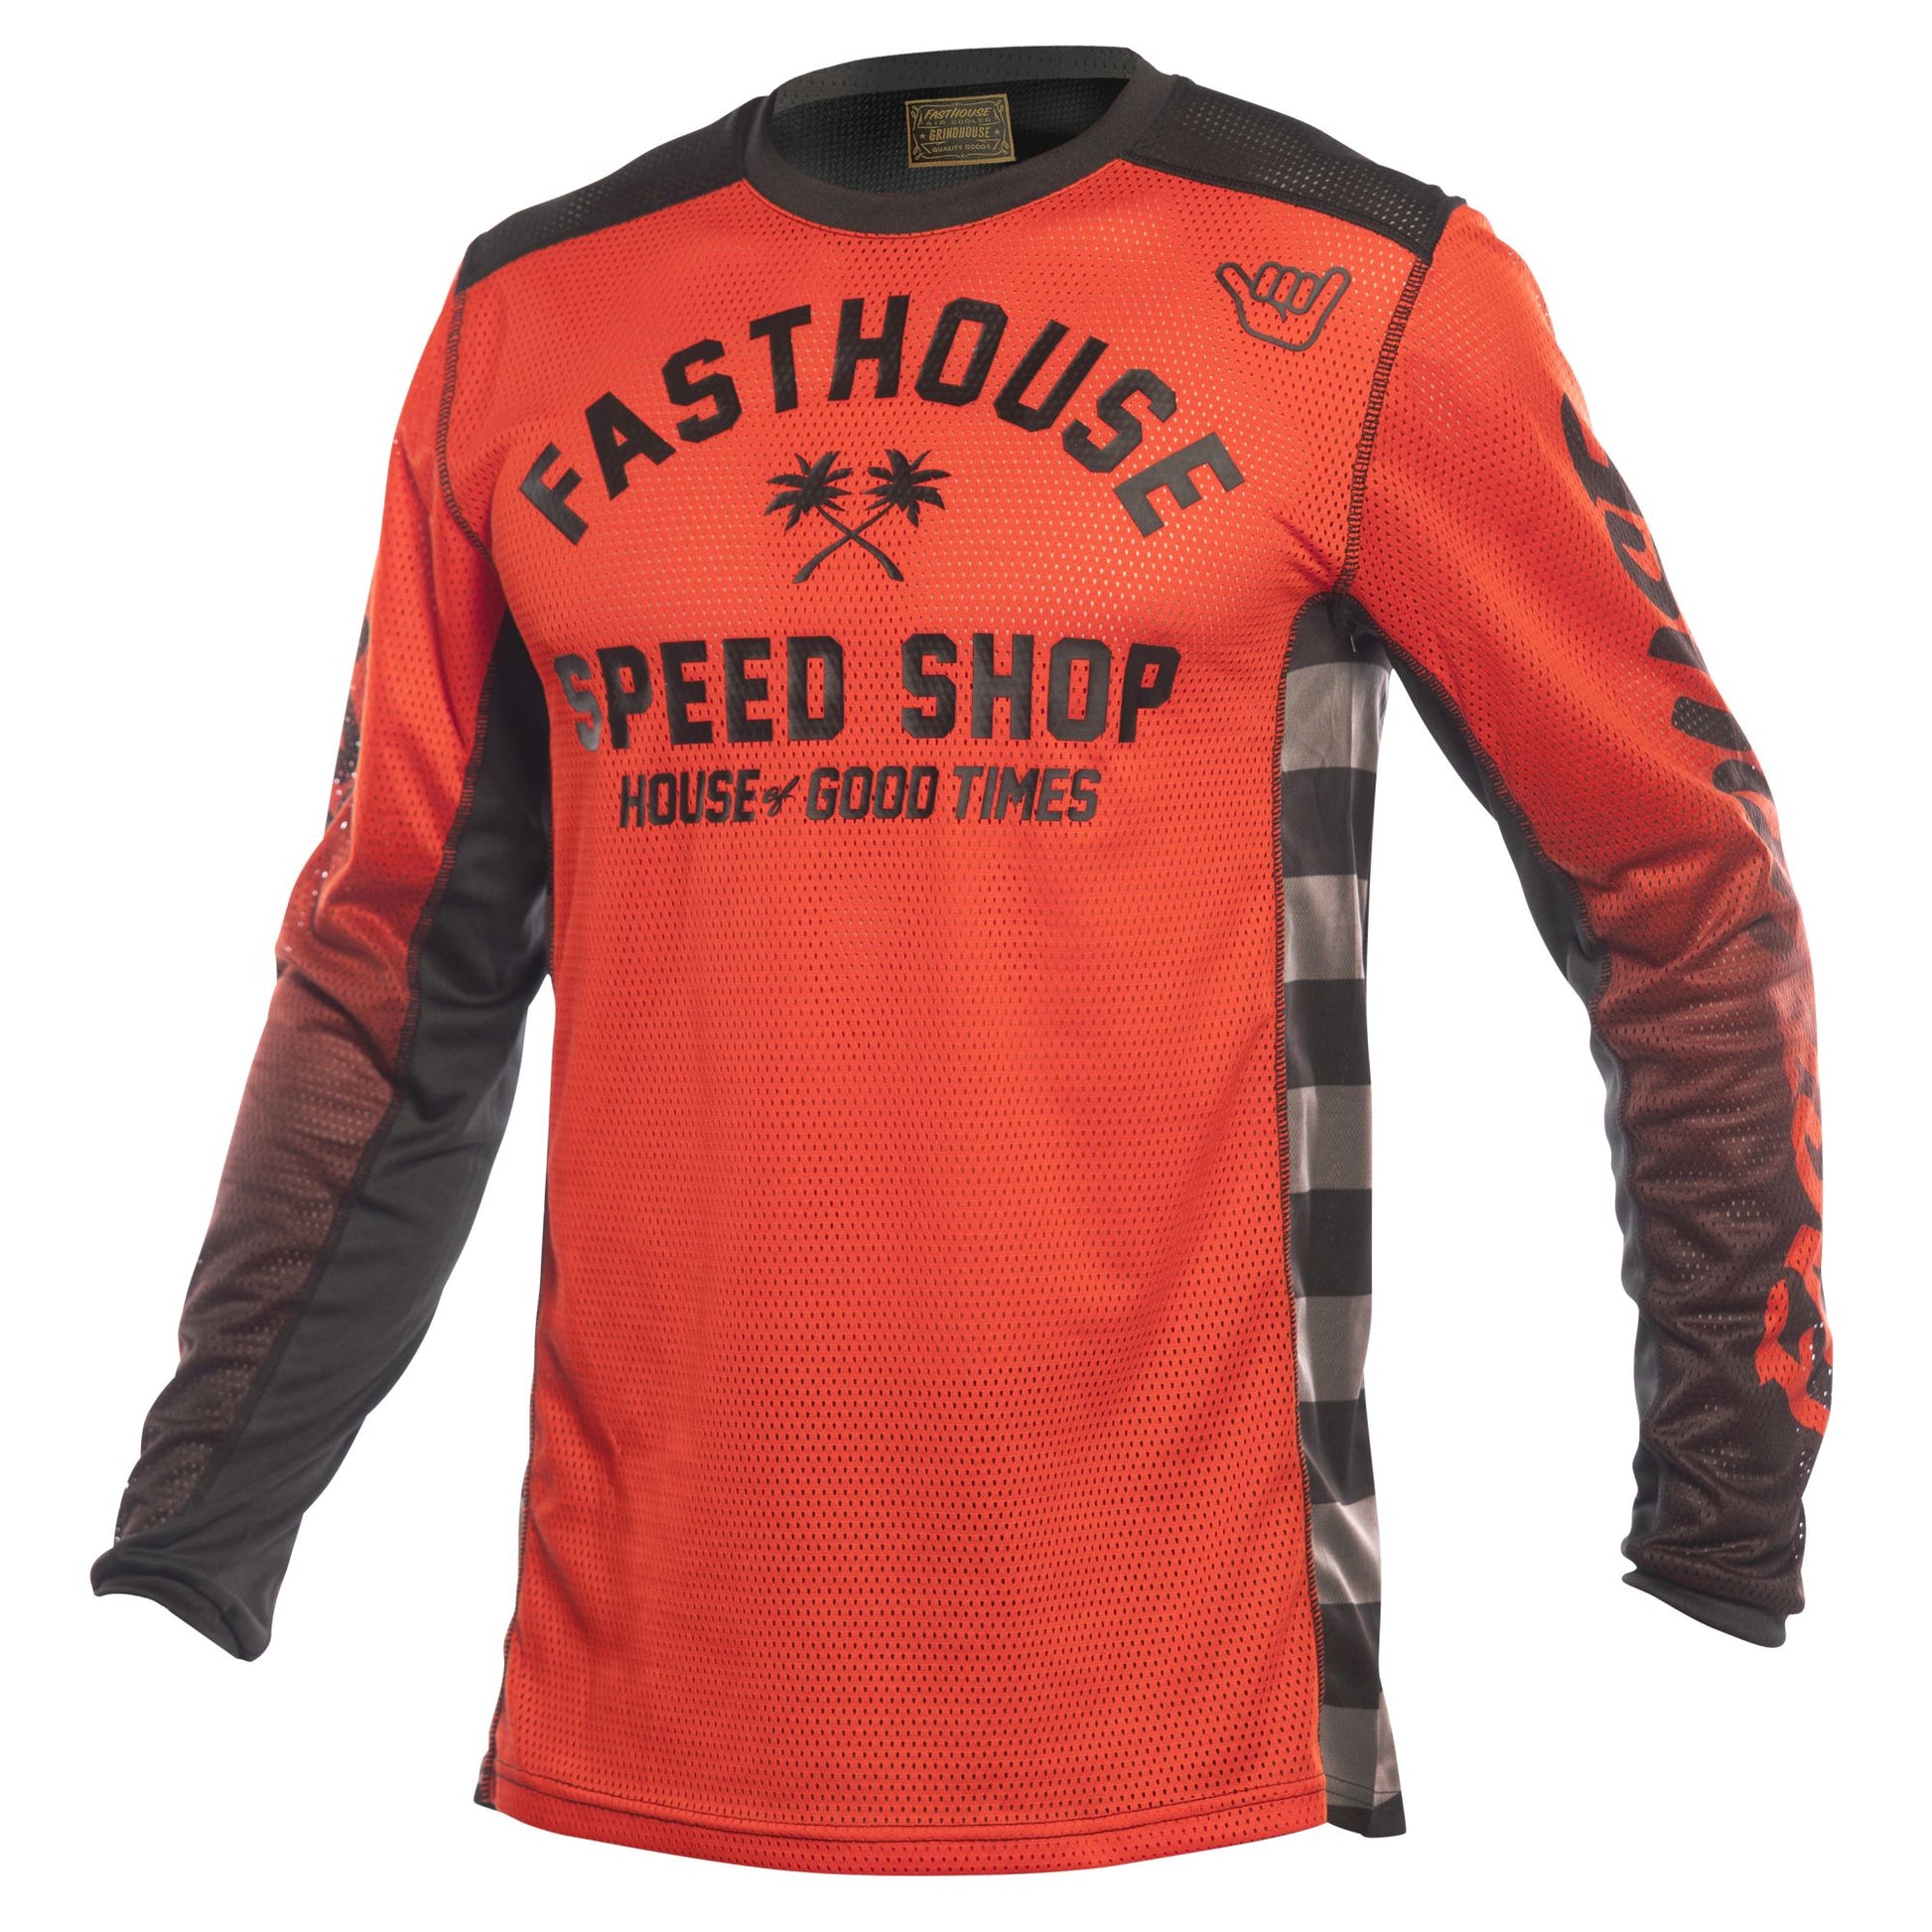 Fasthouse A/C Grindhouse Asher Jersey Infrared Black Bike Jerseys